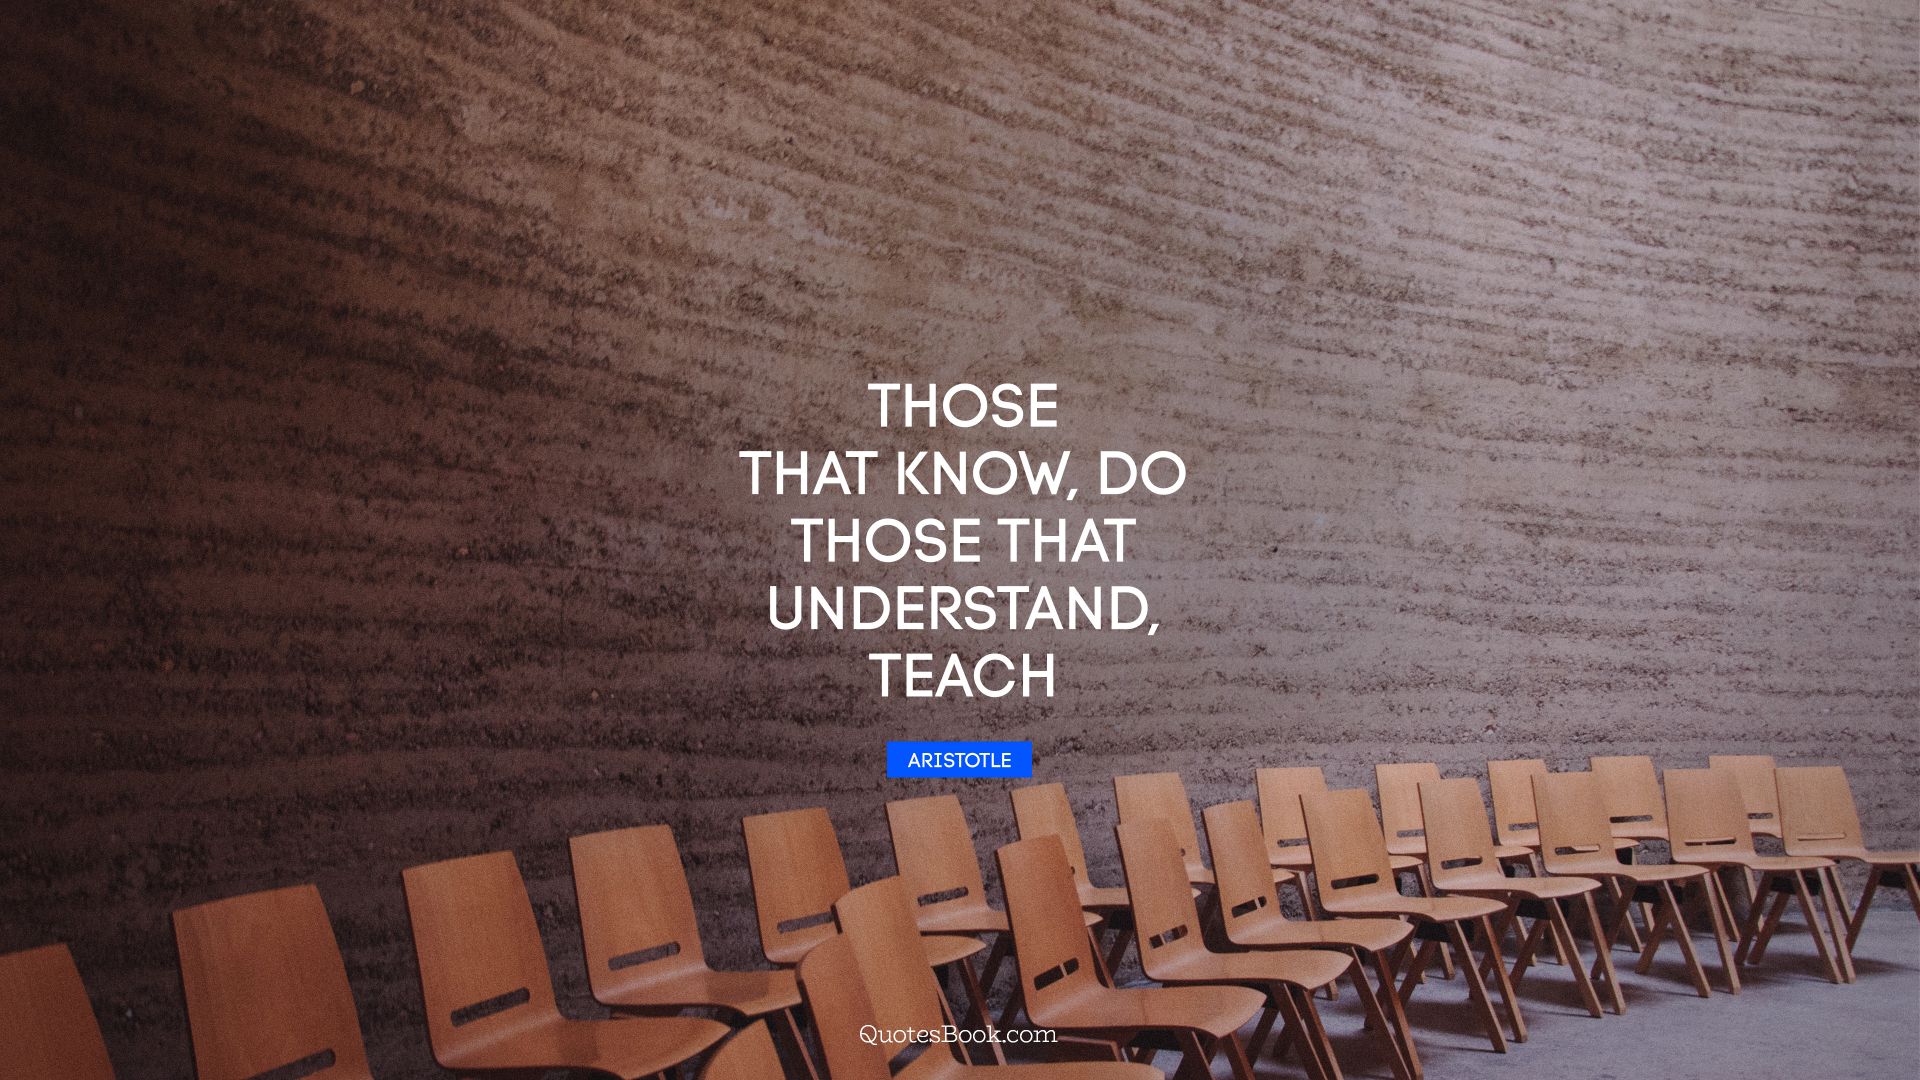 Those that know, do. Those that understand, teach. - Quote by Aristotle